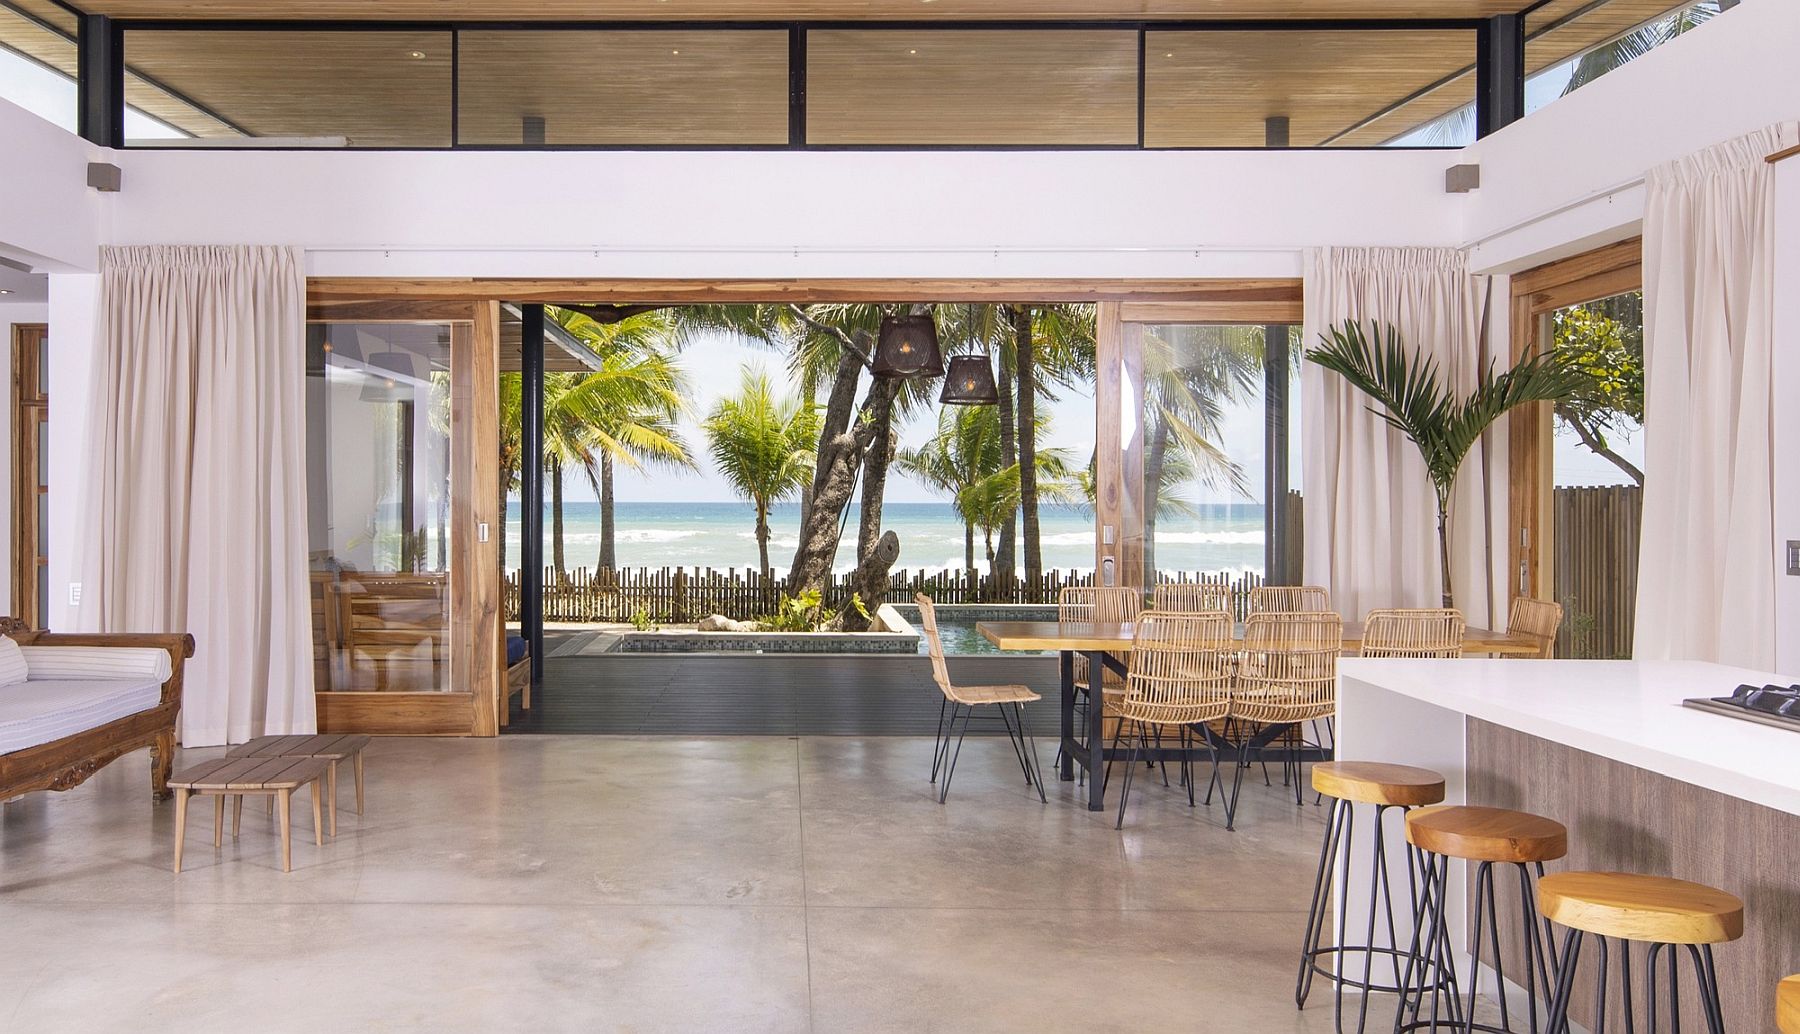 Sliding-glass-doors-open-completely-to-bring-the-beach-indoors